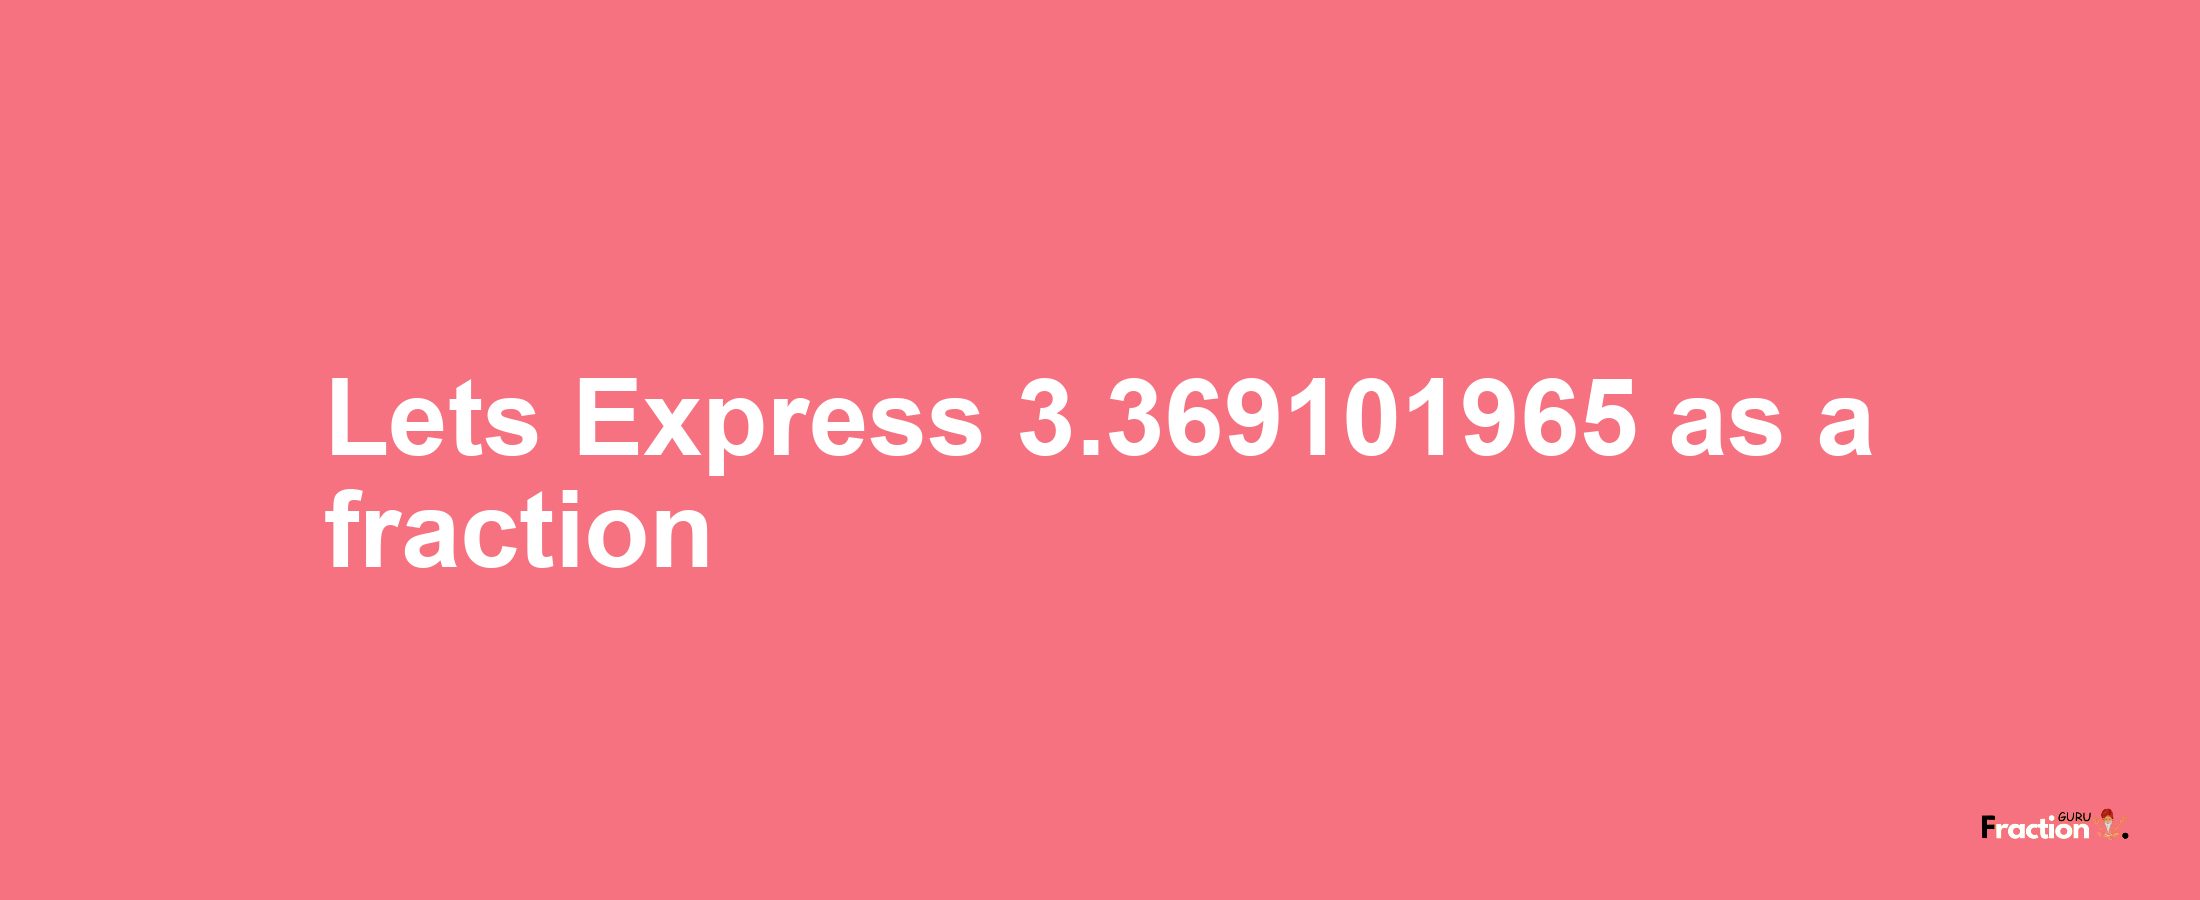 Lets Express 3.369101965 as afraction